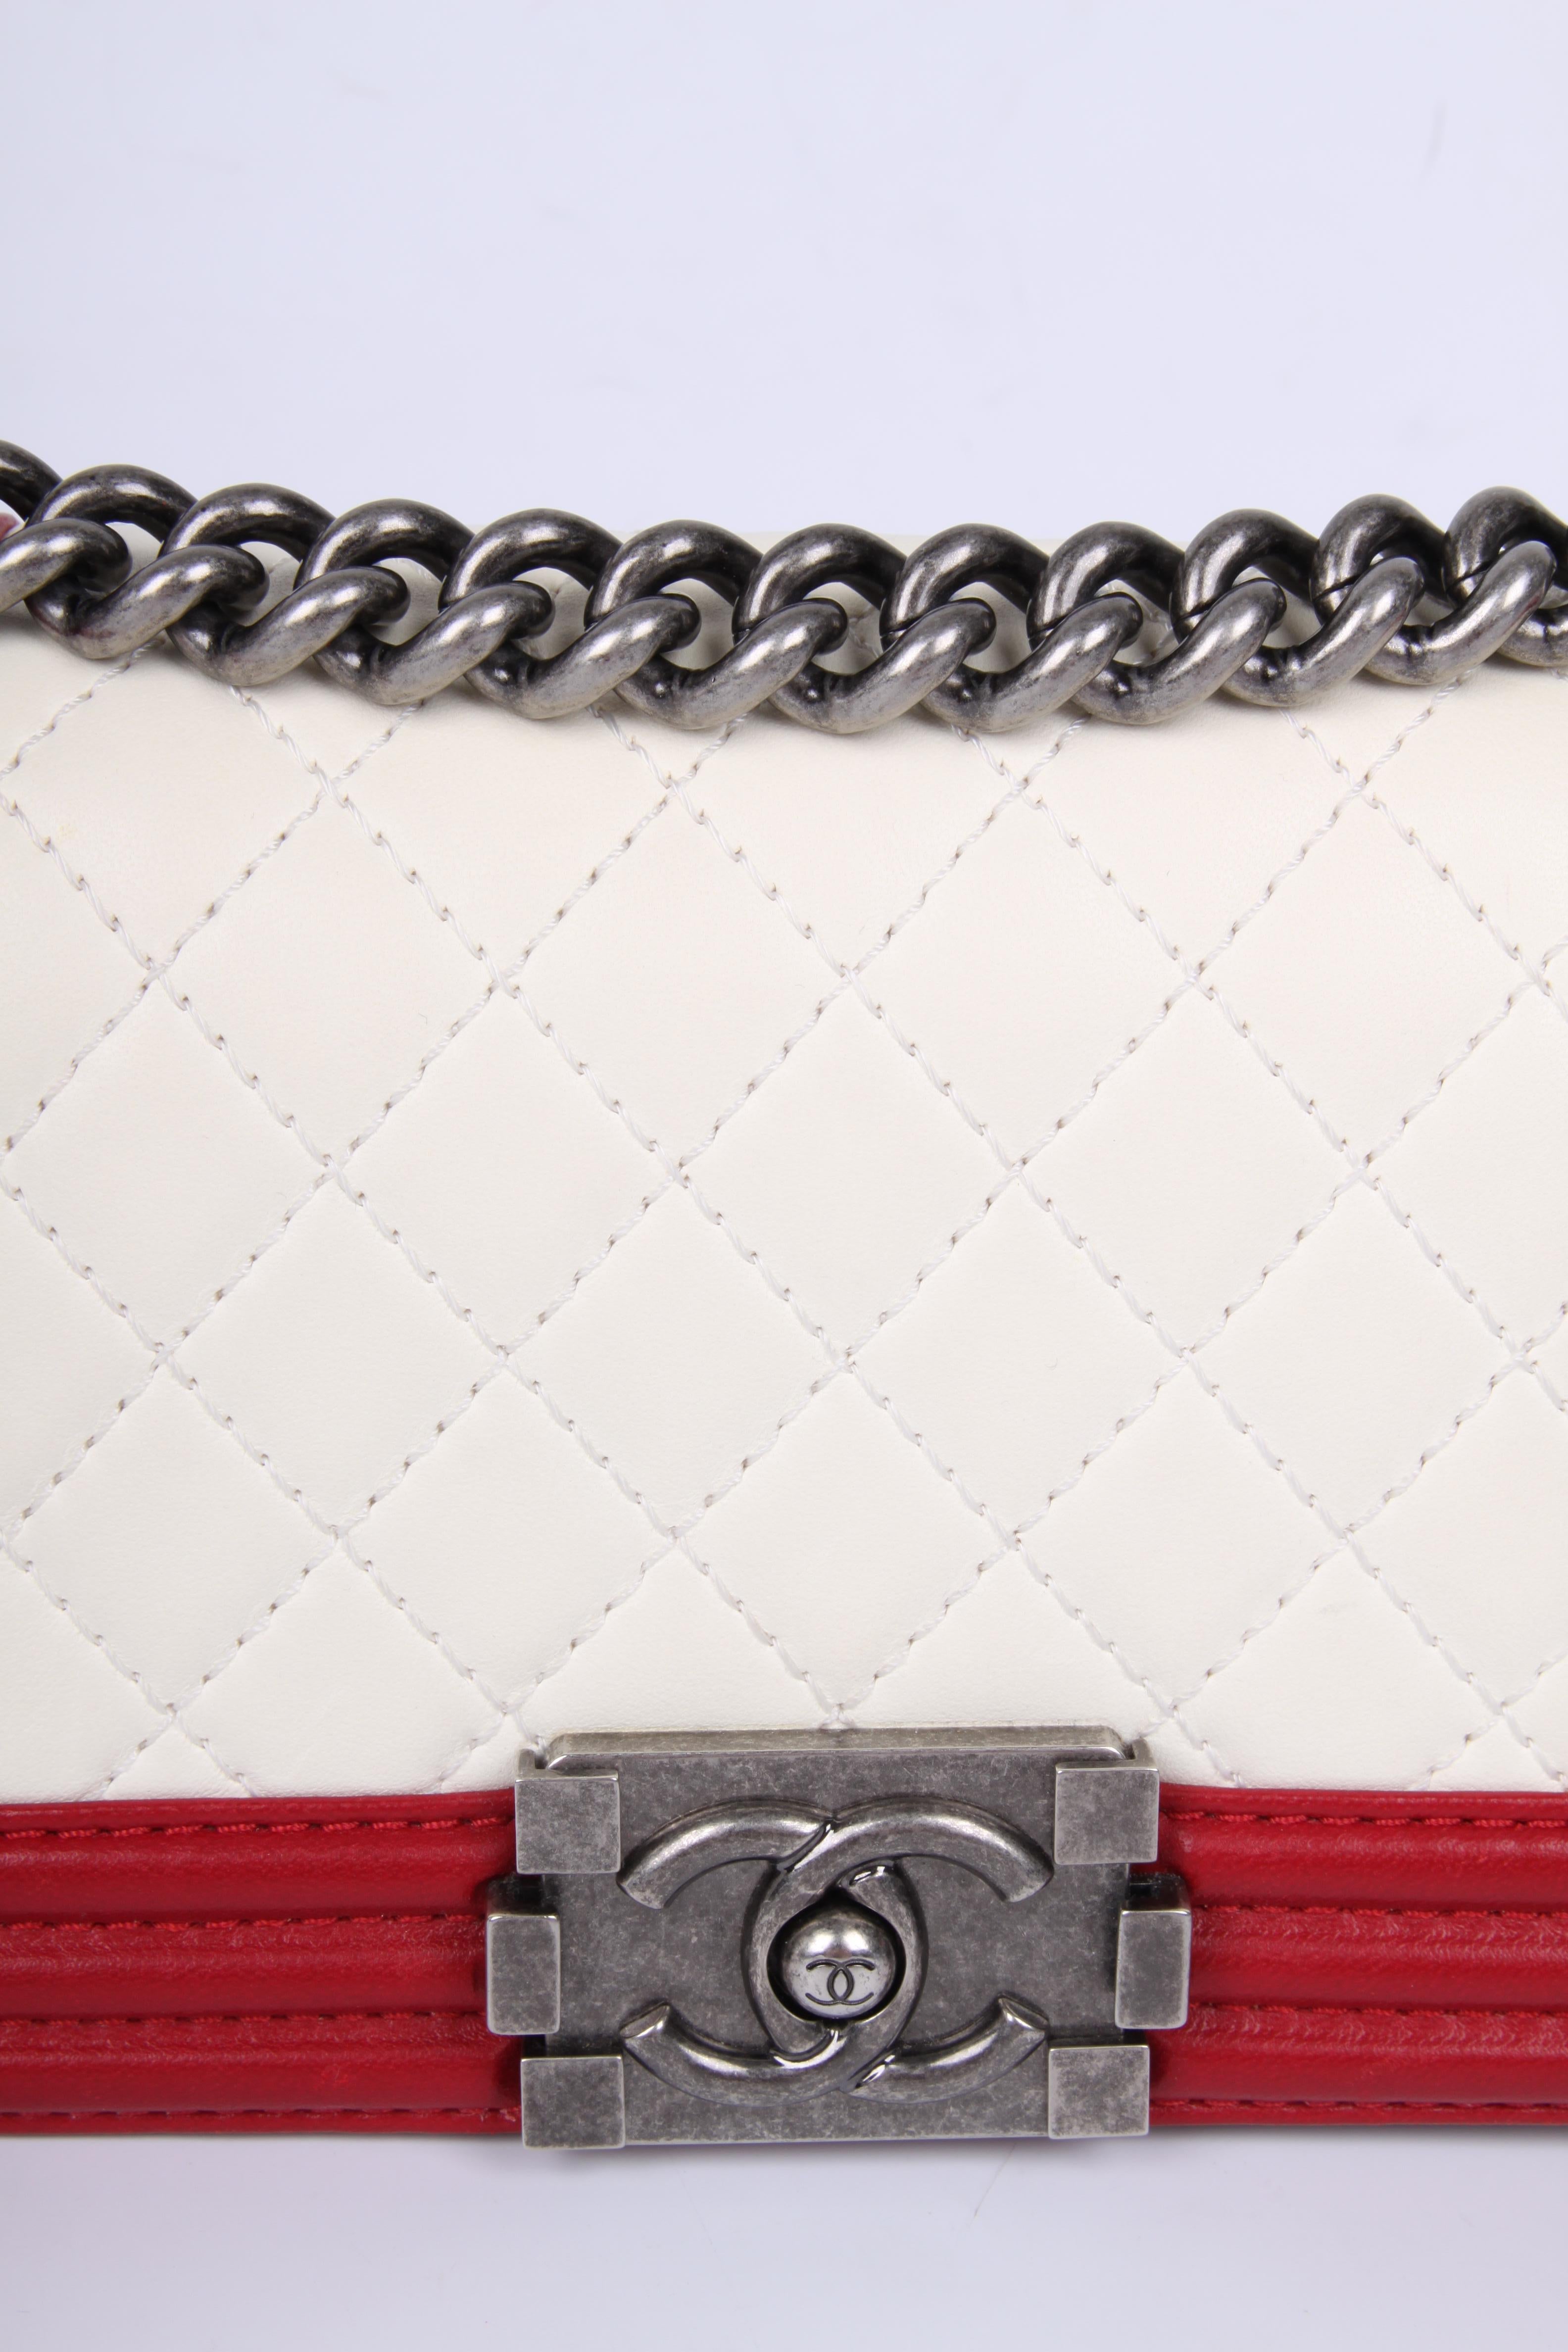 Chanel Quilted Lambskin Le Boy Bag Mini - red/white In Excellent Condition For Sale In Baarn, NL